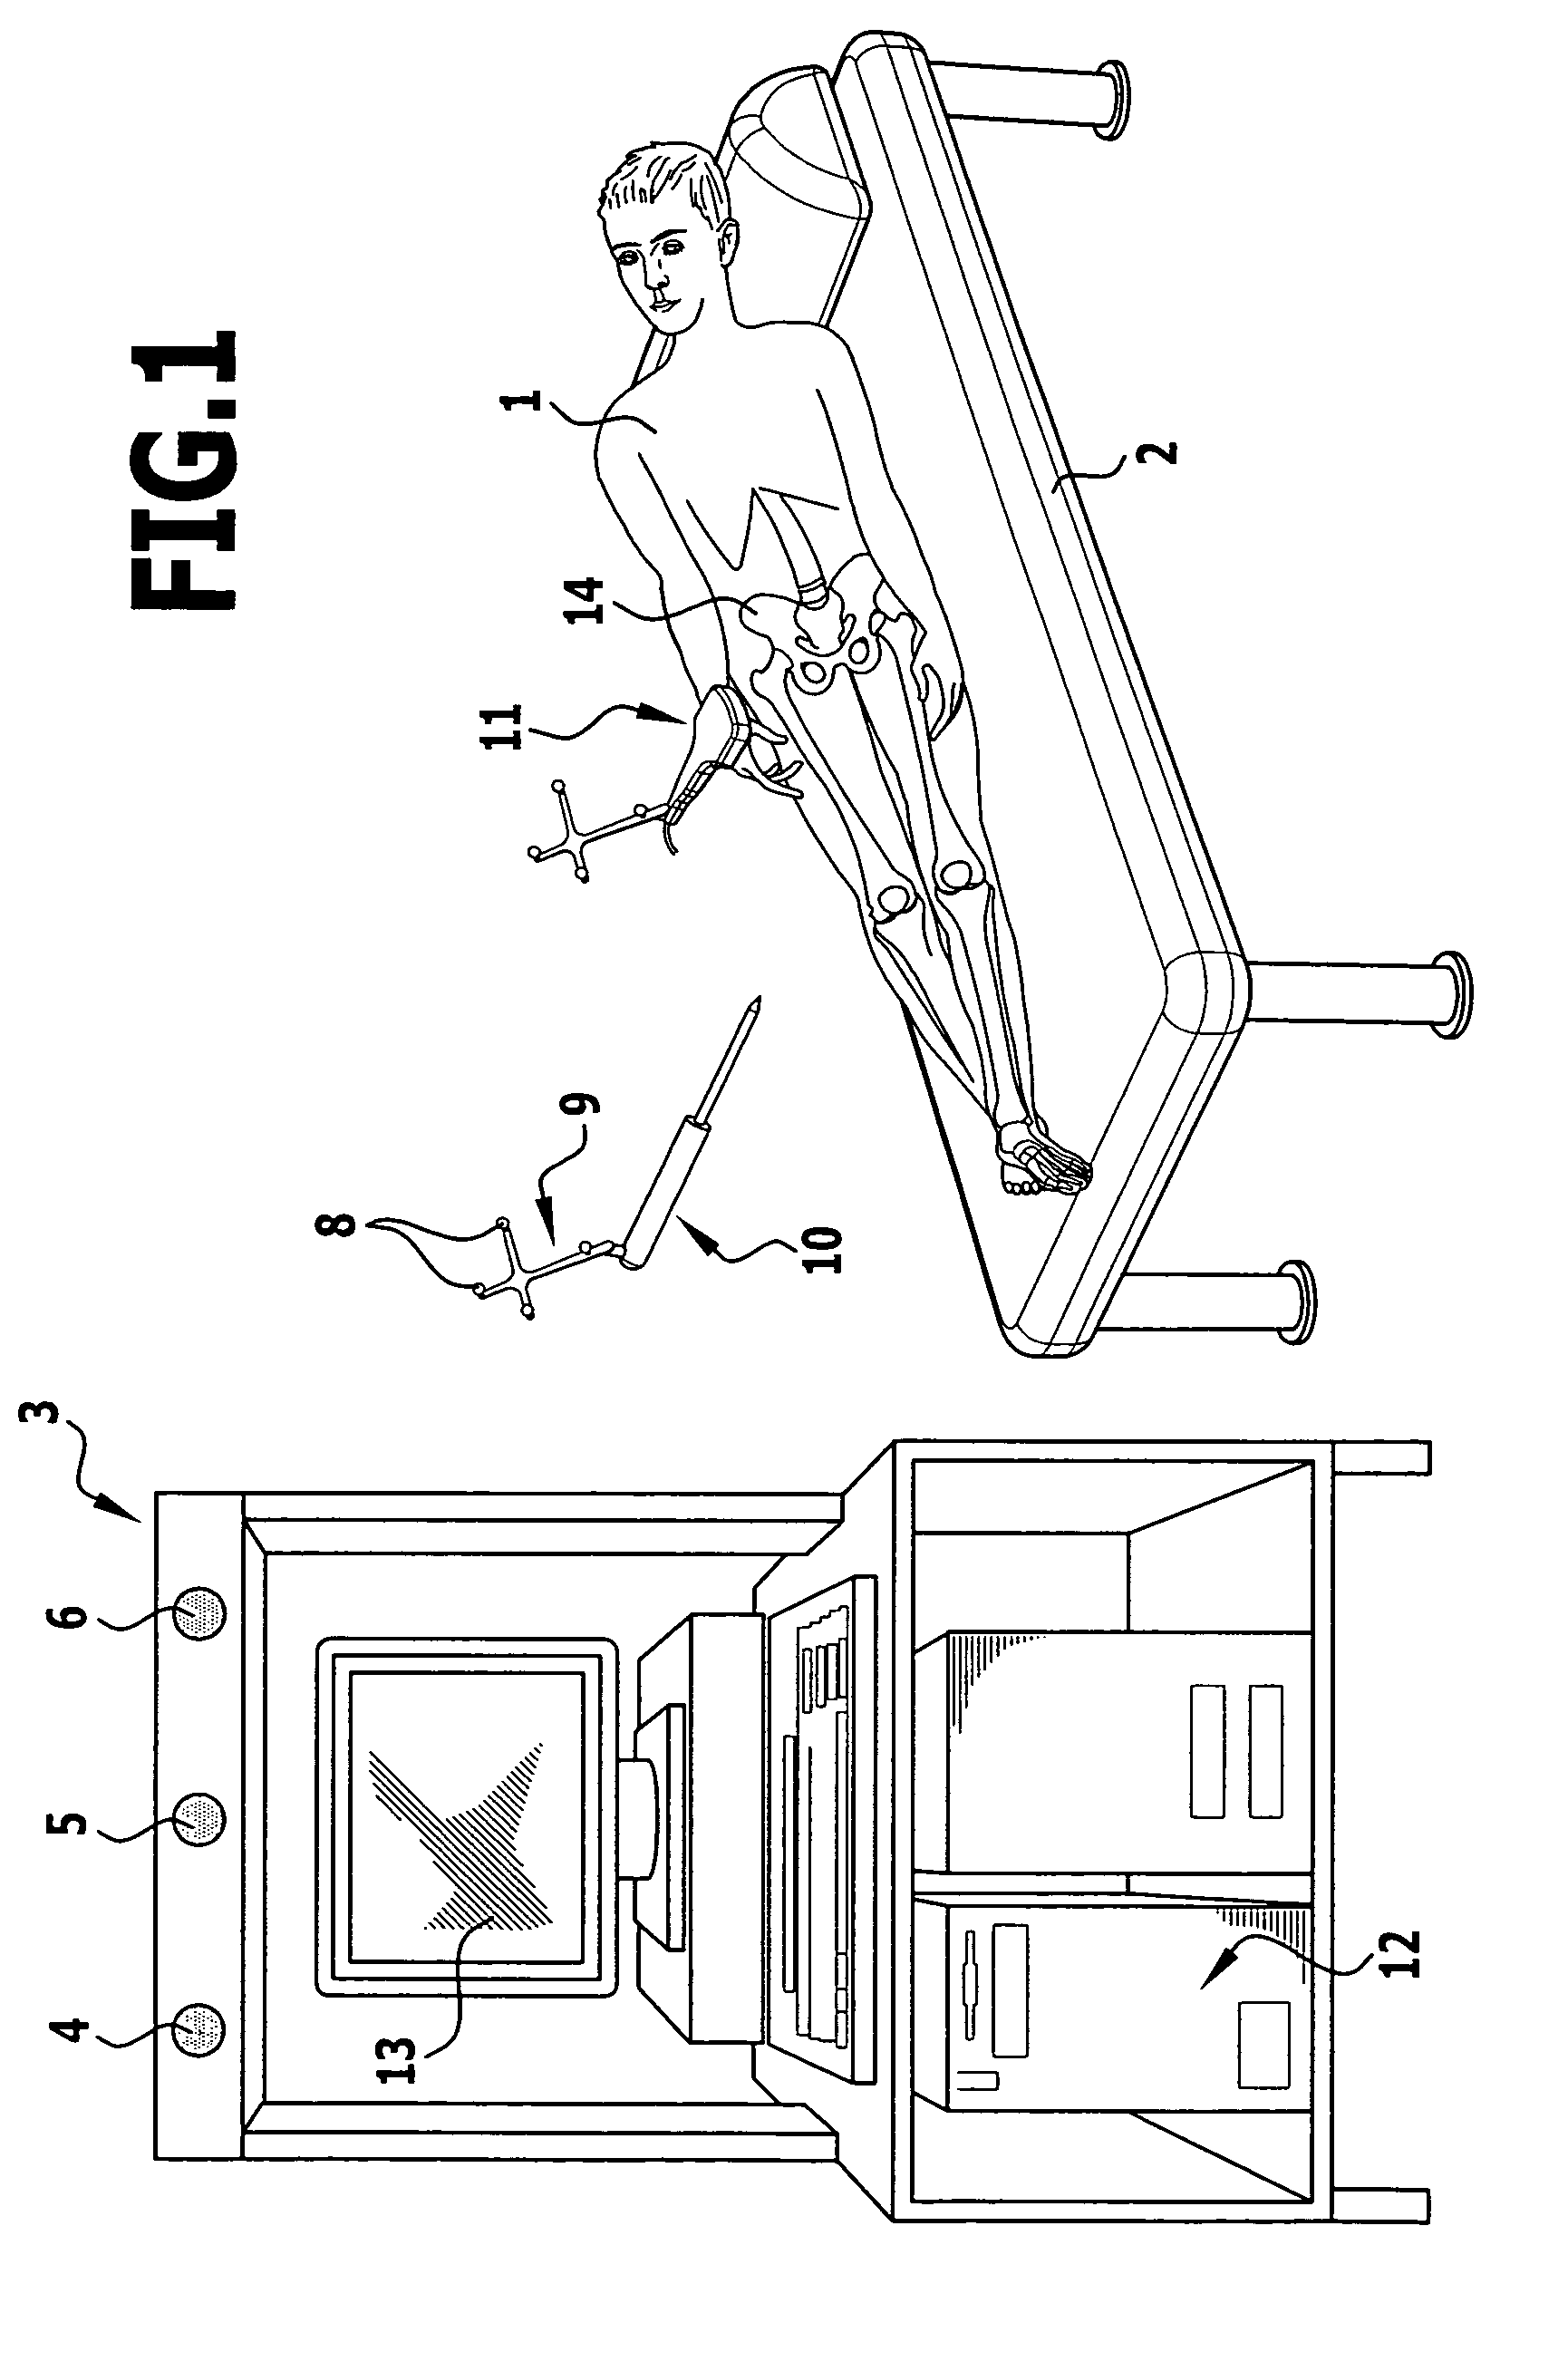 Method and apparatus for determining the angular position of an acetabulum in a pelvic bone